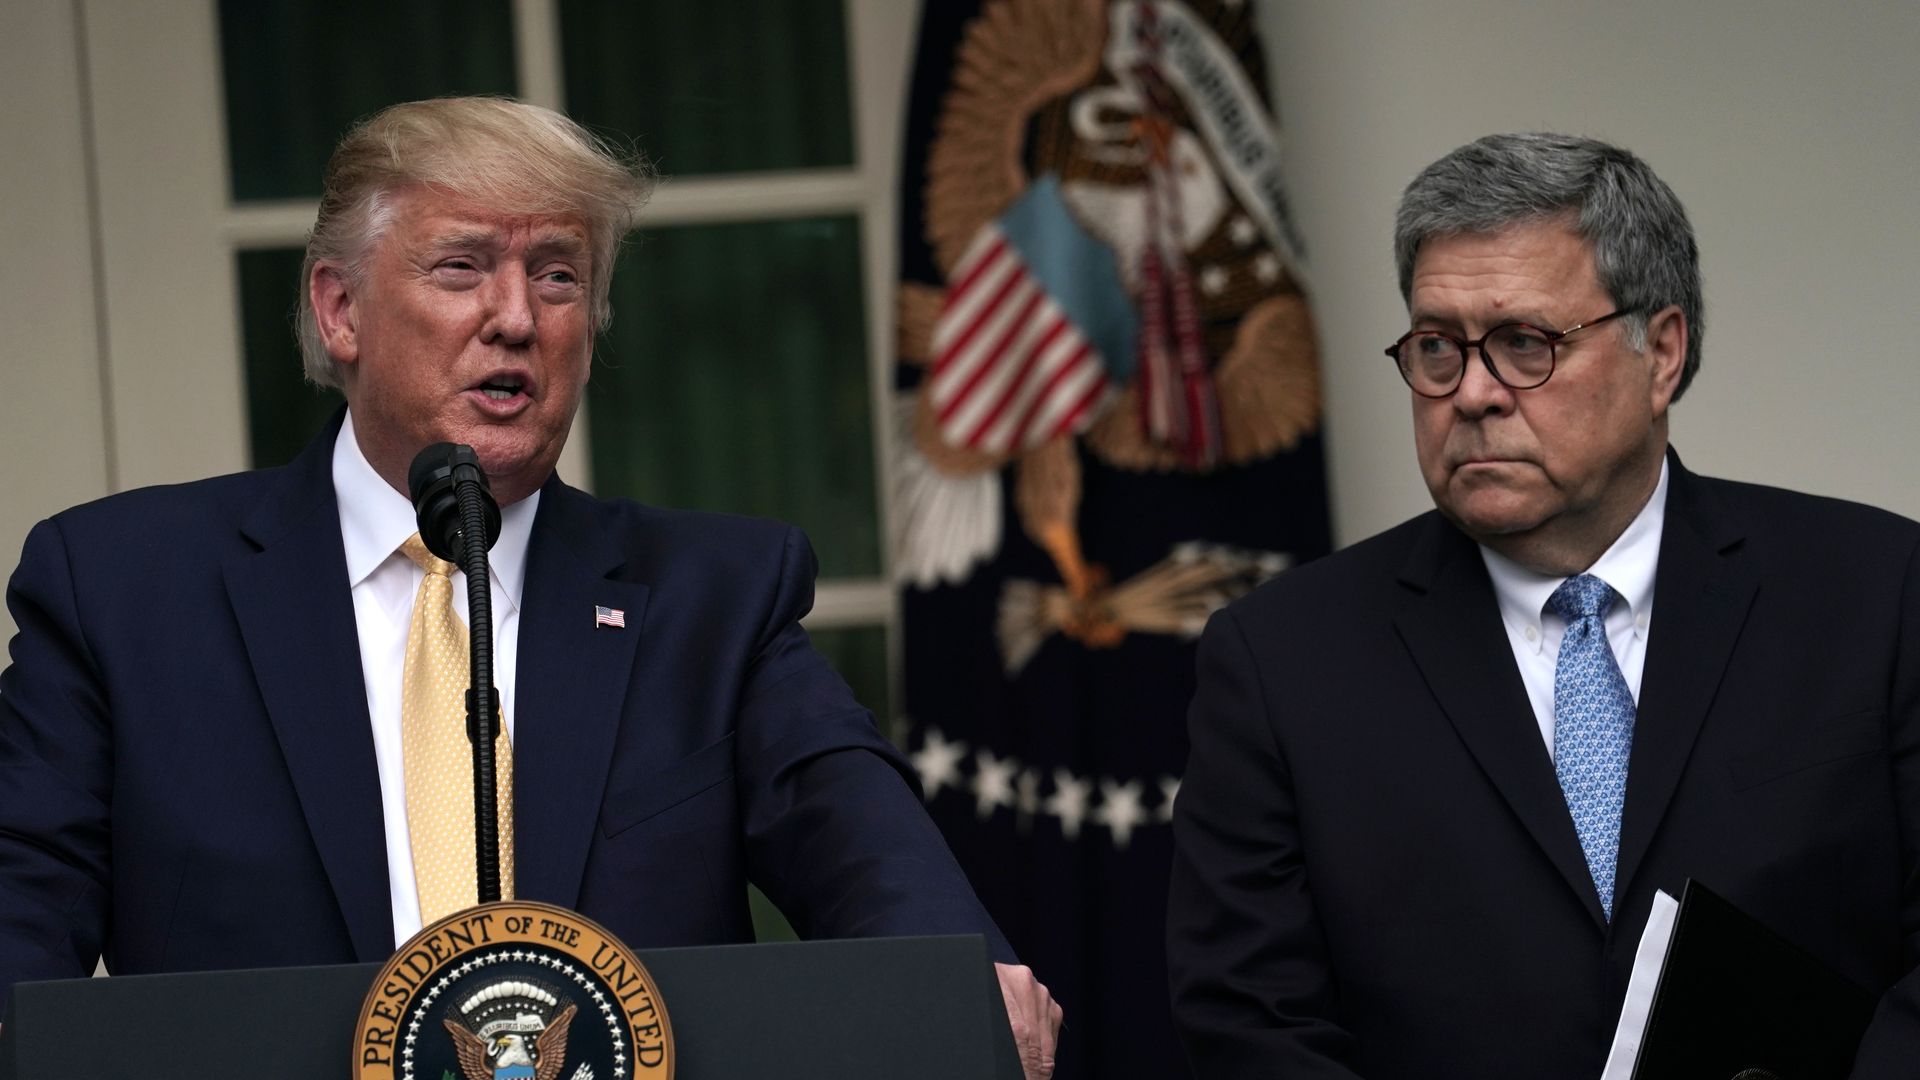  President Donald Trump makes a statement on the census with Attorney General William Barr in the Rose Garden of the White House on July 11, 2019